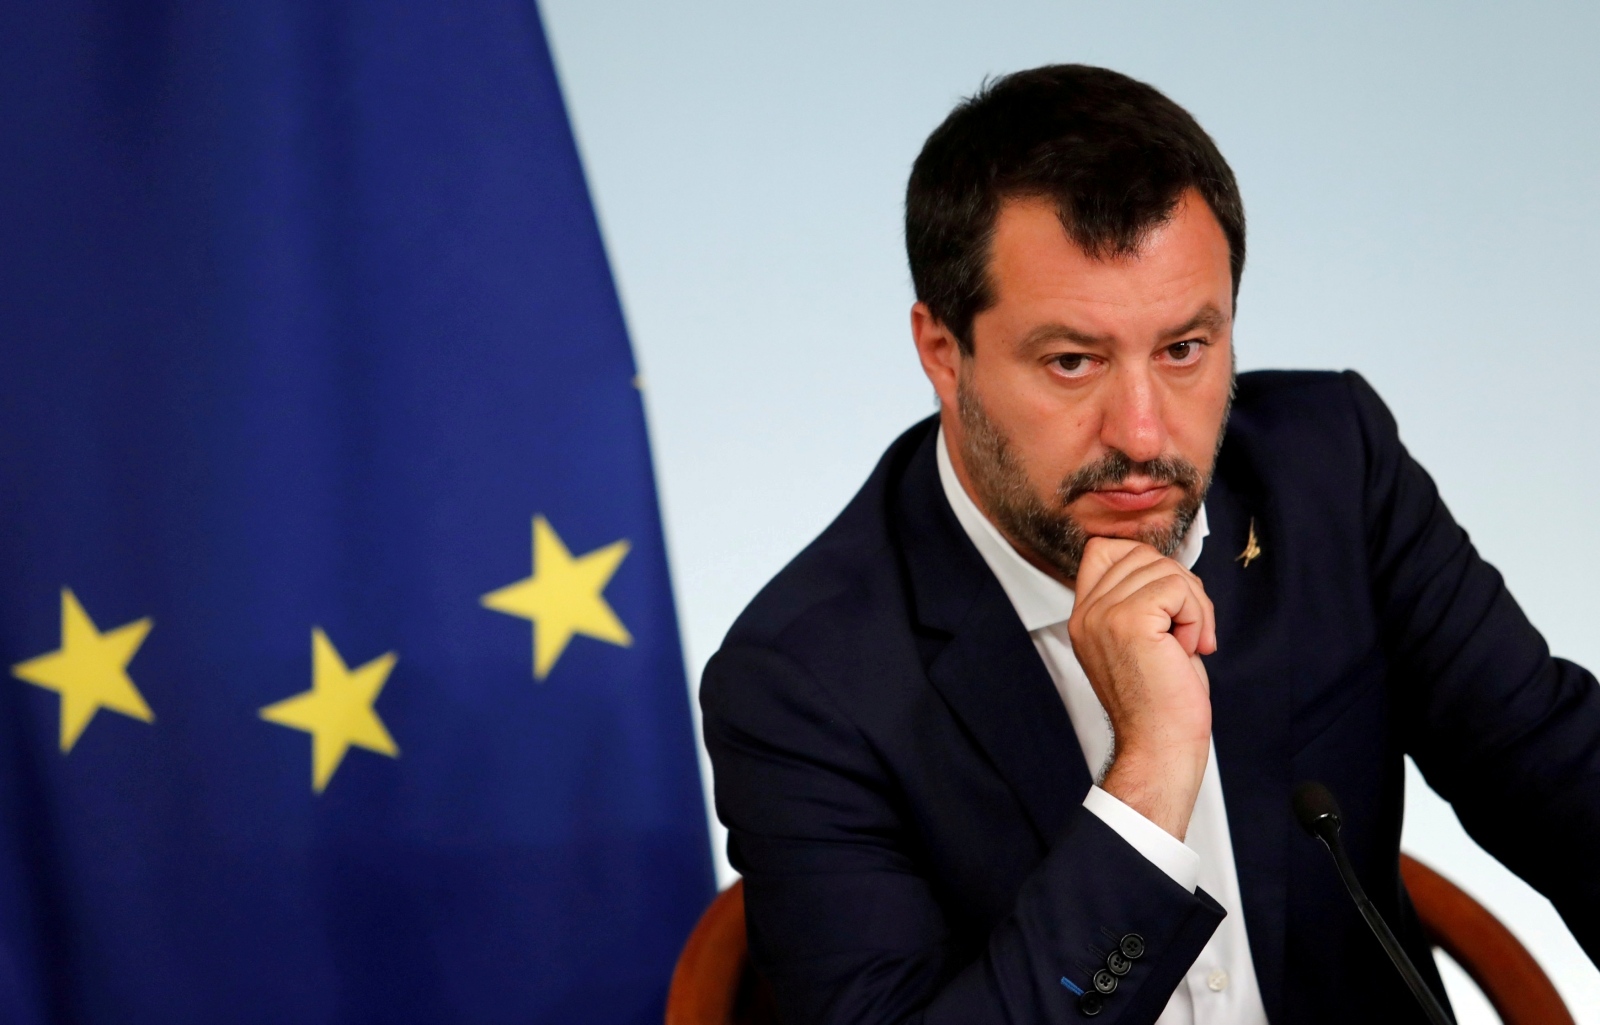 FILE PHOTO: Italian PM Conte and Deputy PM Salvini hold a joint news conference in Rome FILE PHOTO: Italian Deputy Prime Minister Matteo Salvini attends a joint news conference following a cabinet meeting in Rome, Italy, June 11, 2019 REUTERS/Remo Casilli/File Photo Remo Casilli